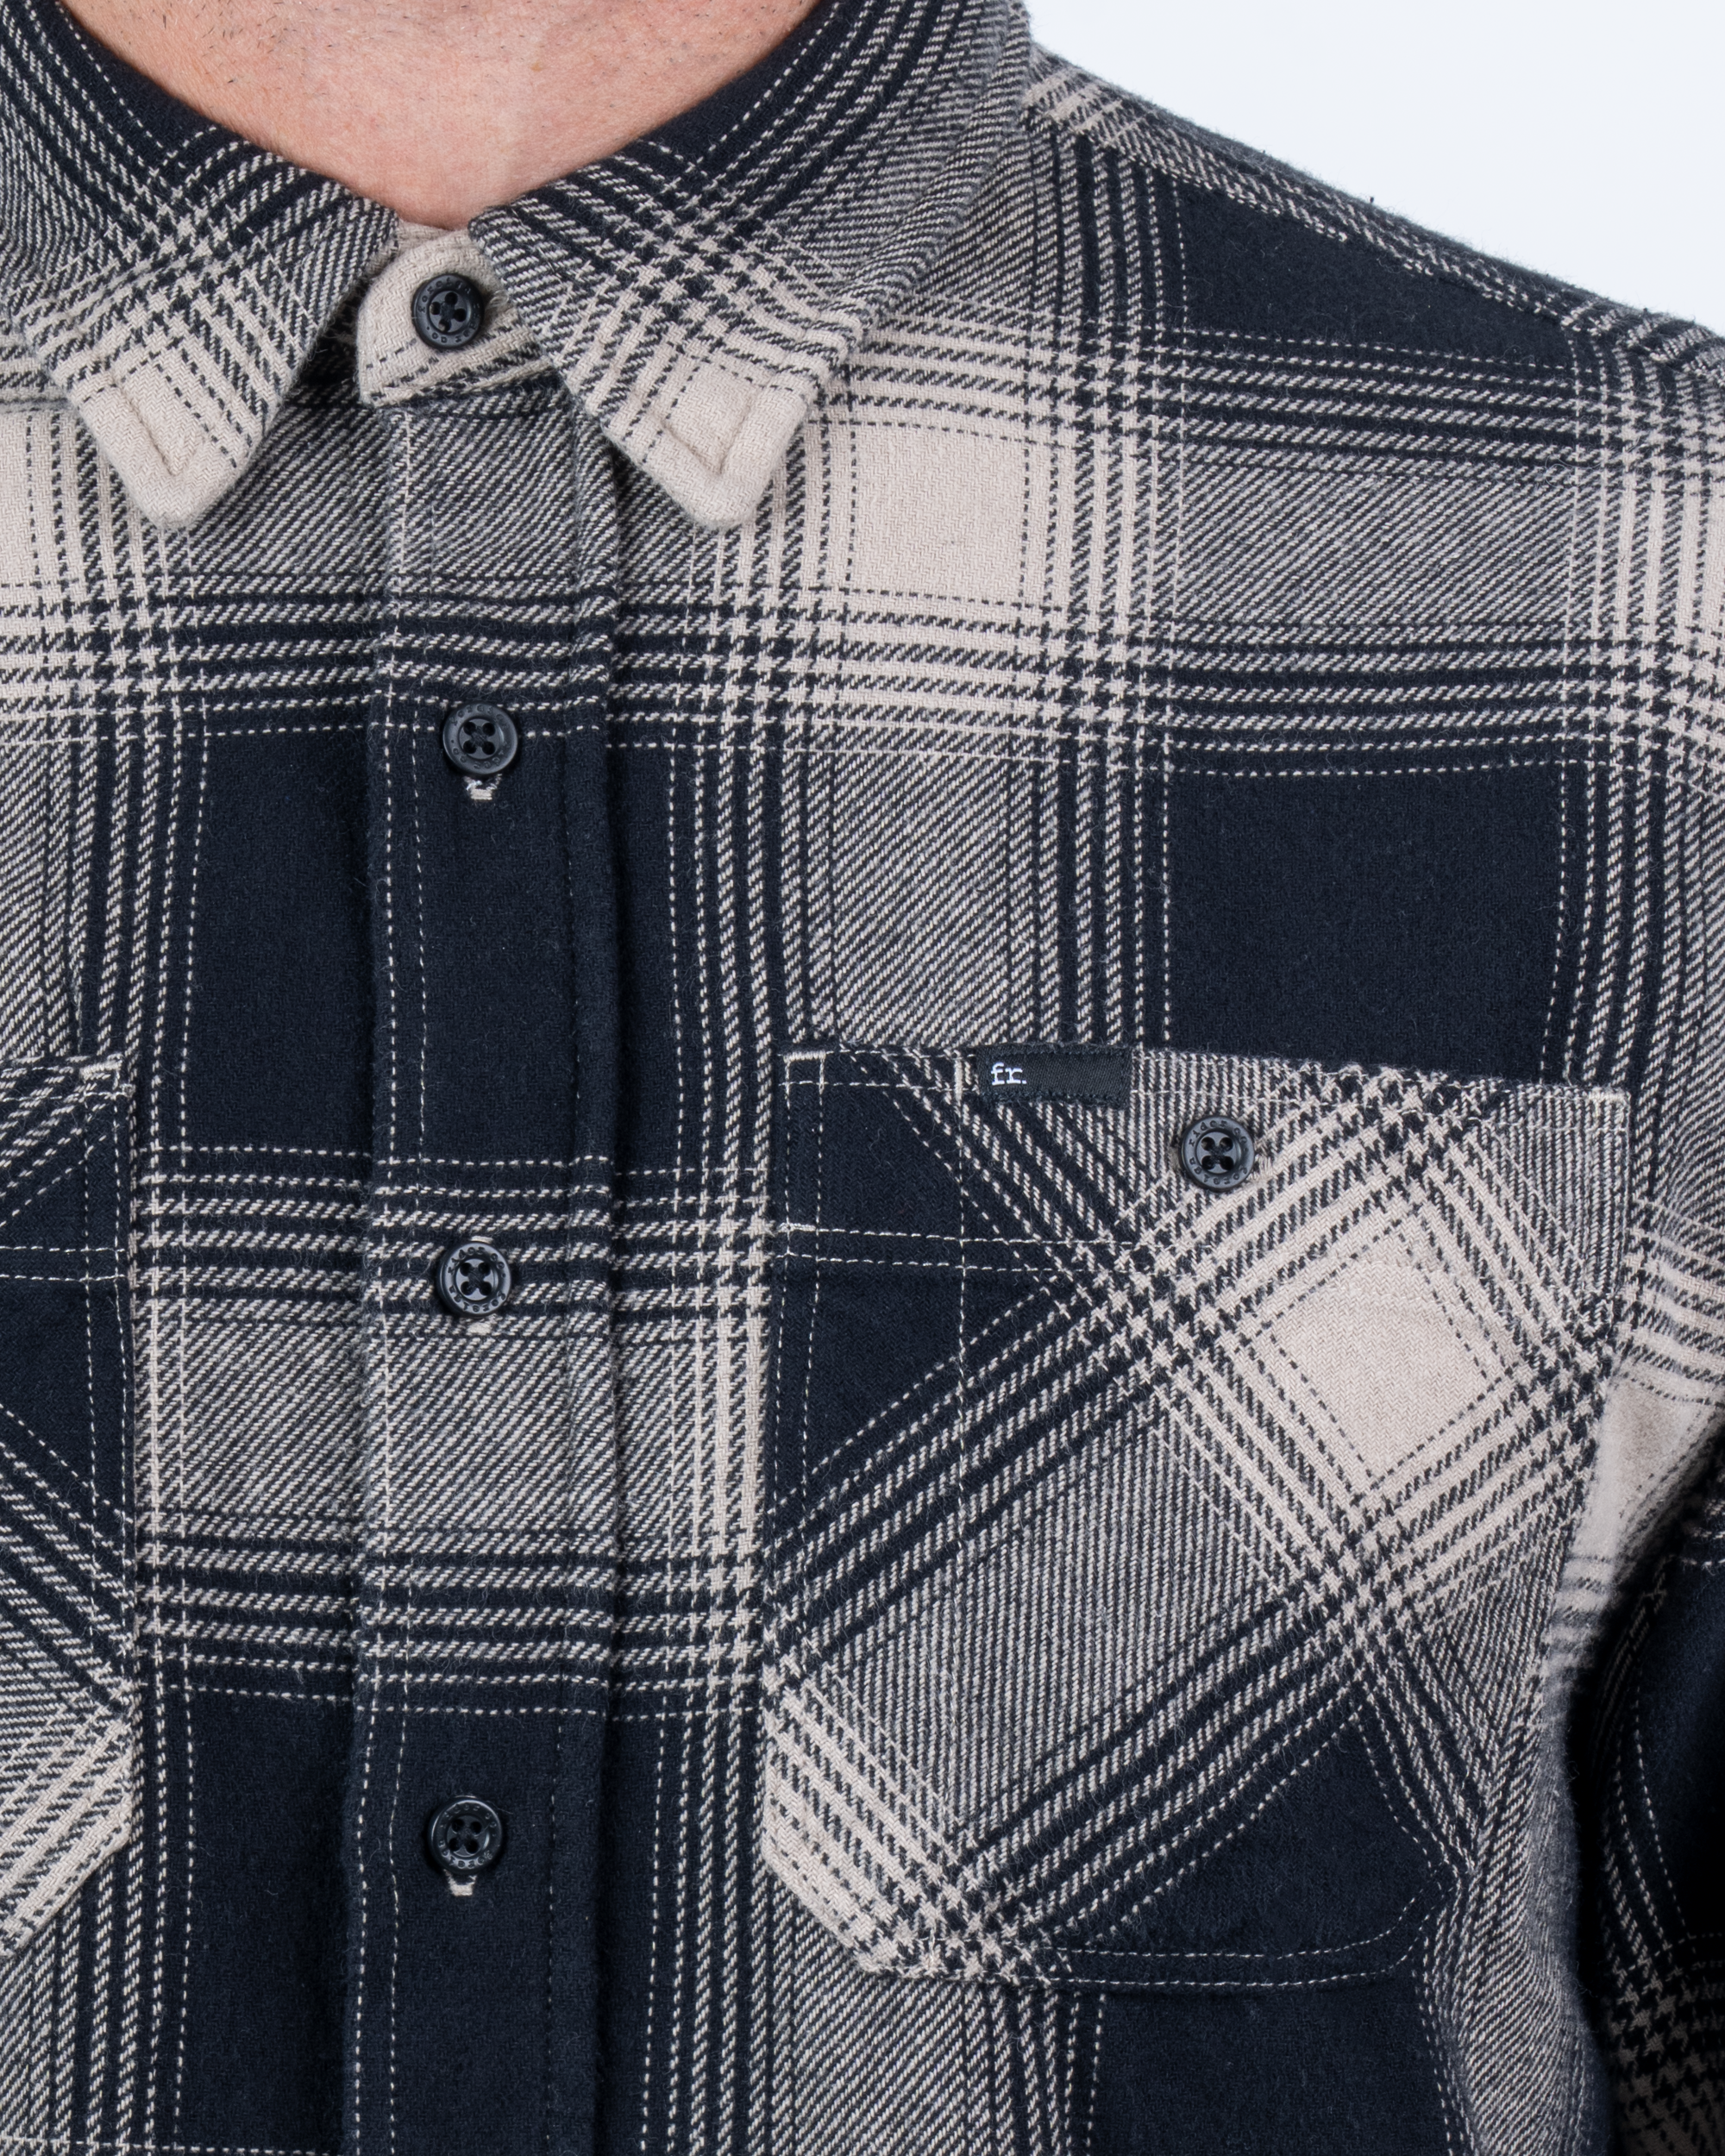 Foreign Rider Co Organic Cotton Black Flannel Plaid Long Sleeve Button Up Shirt Button Chest Pocket